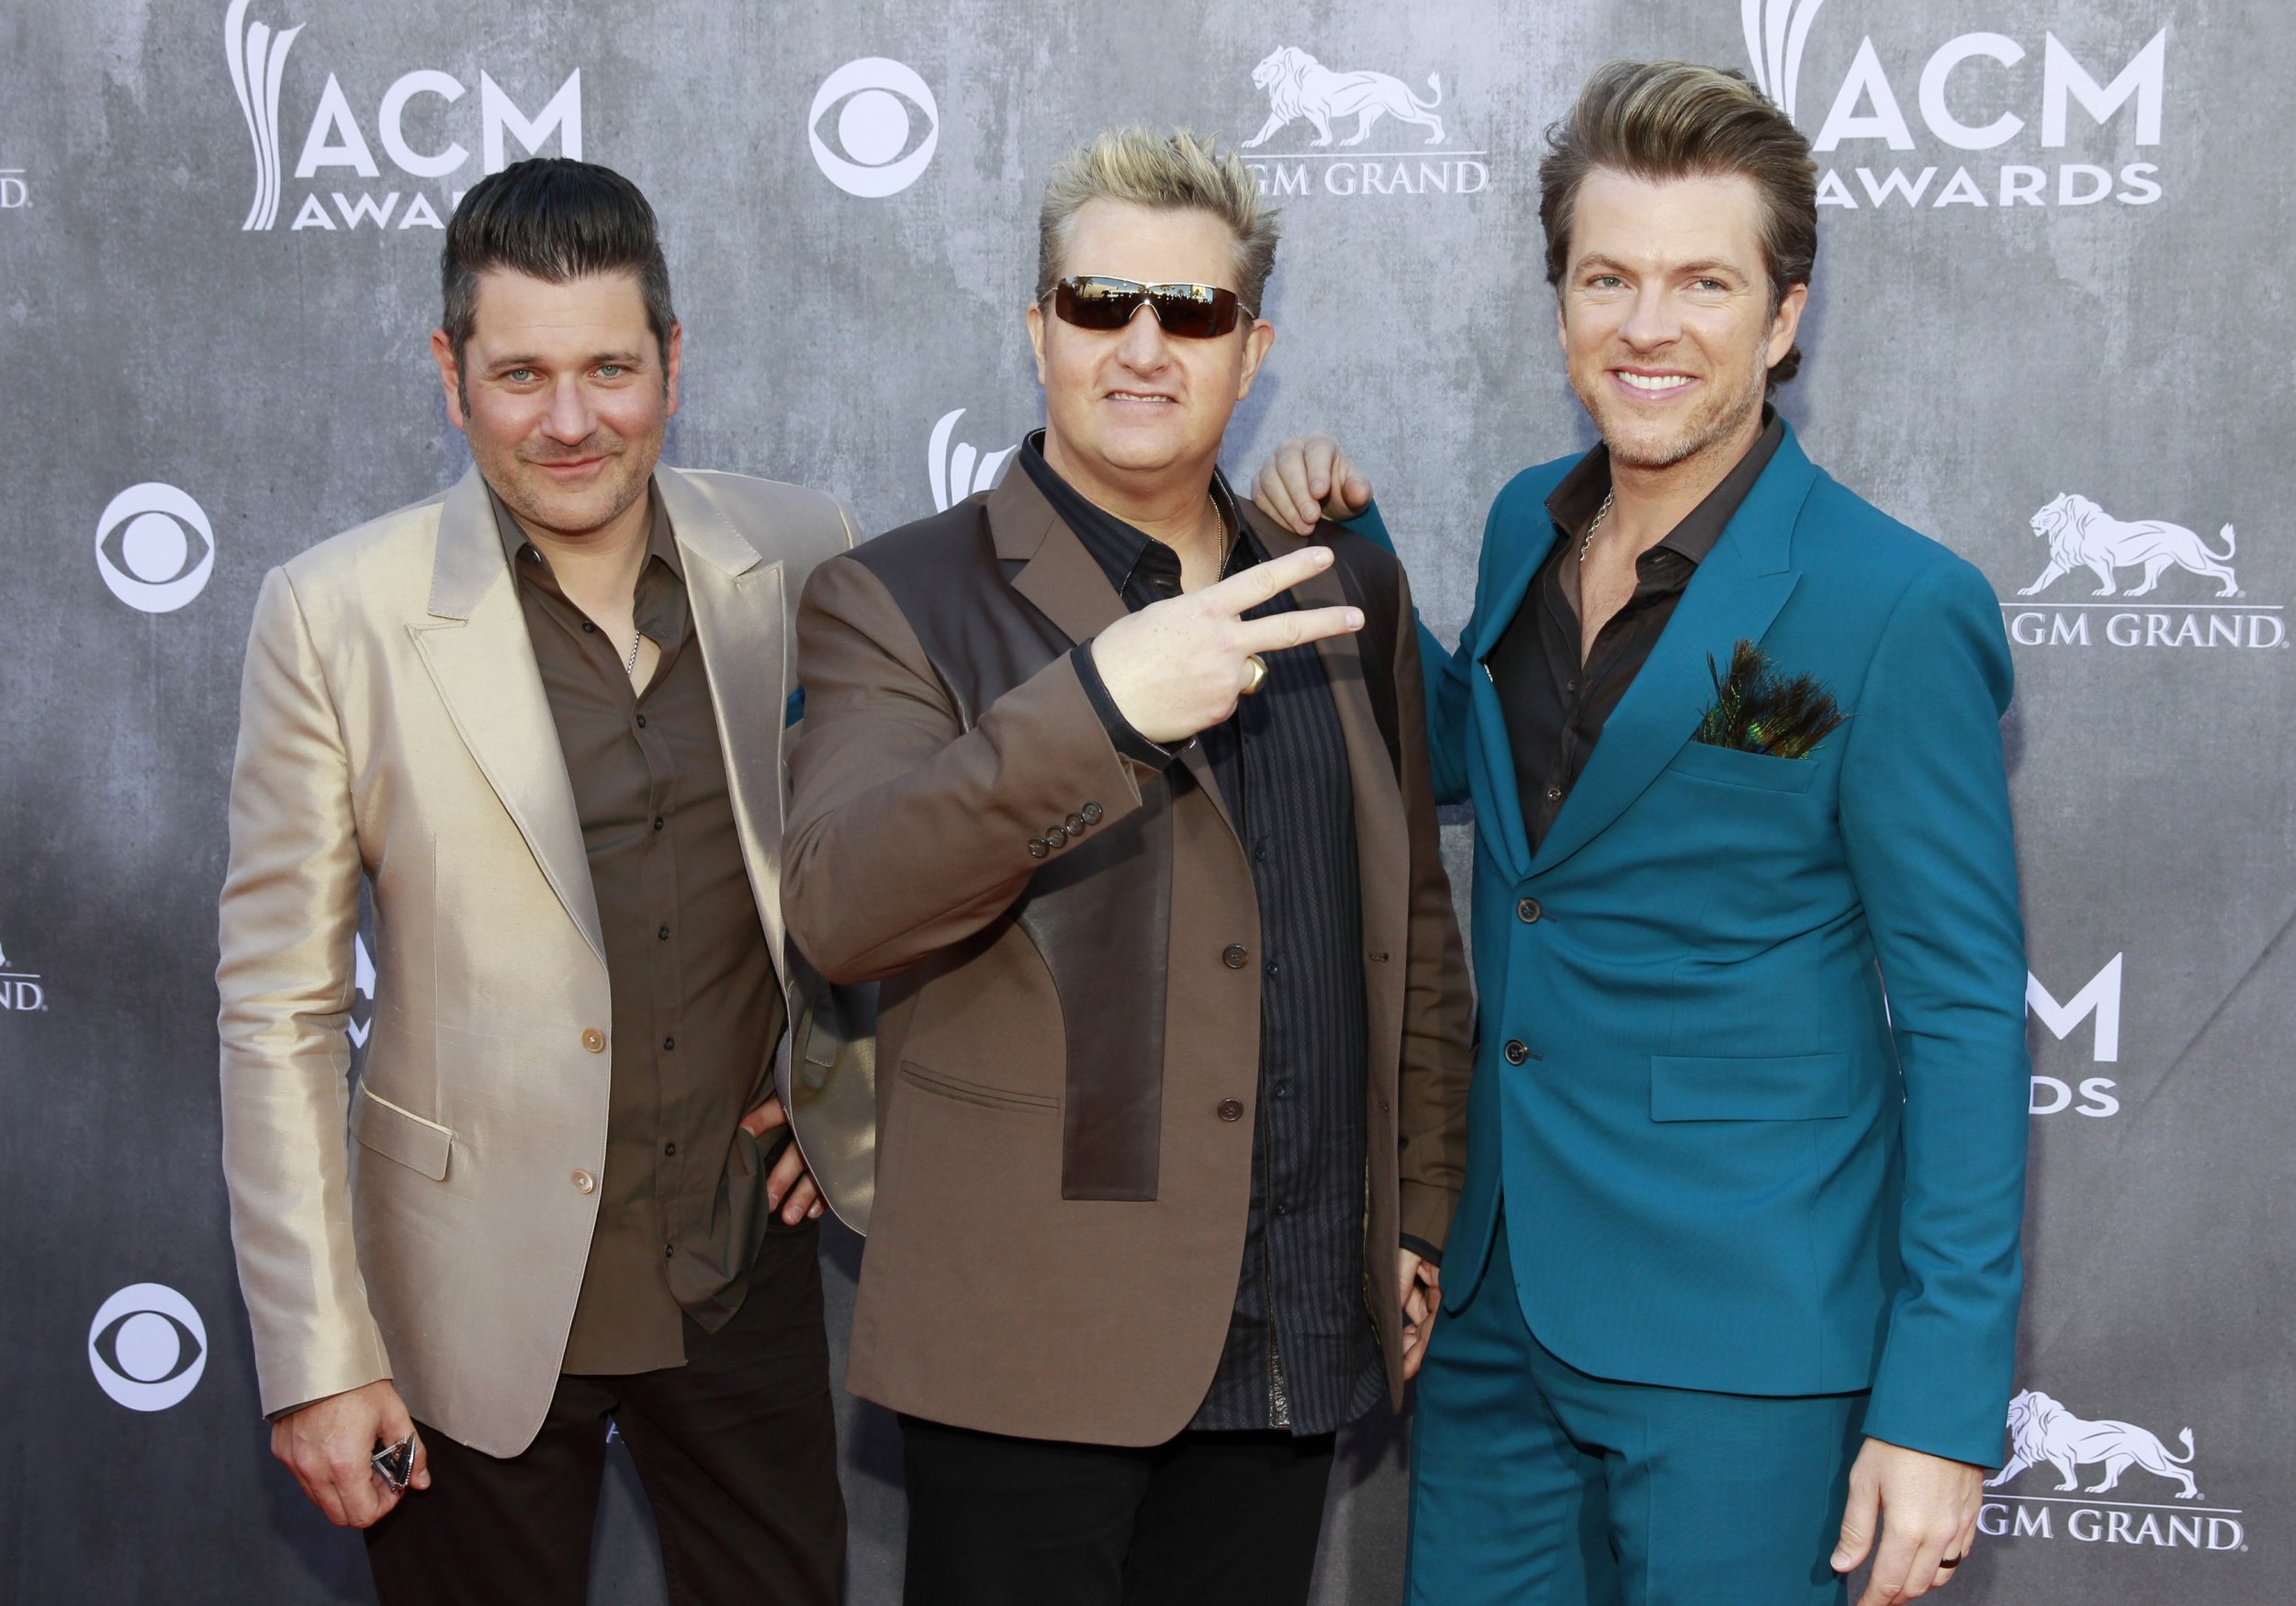 Rascal Flatts 2020 Farewell Tour US Dates Announced After Breakup